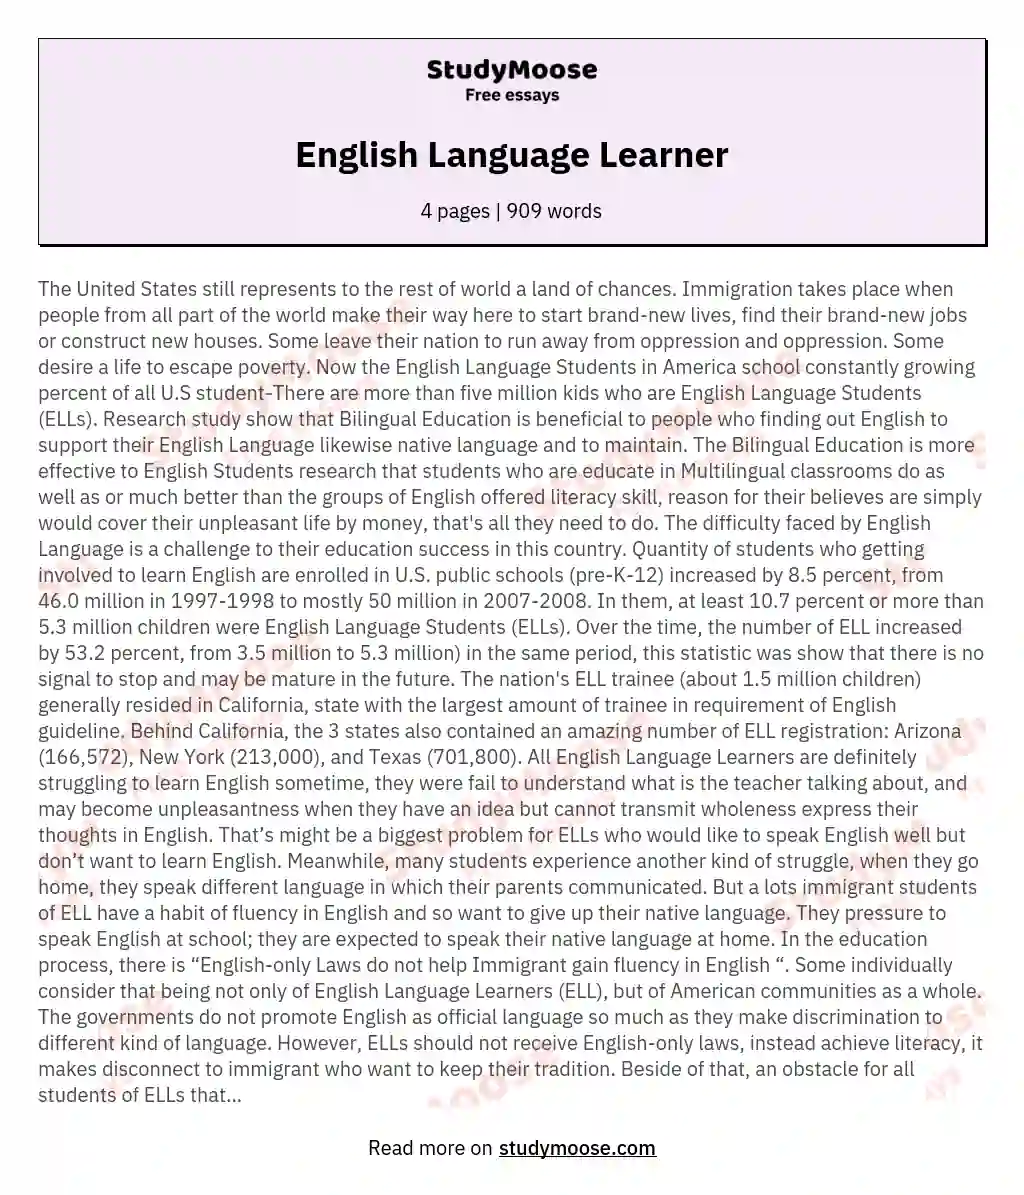 example essay about learning english